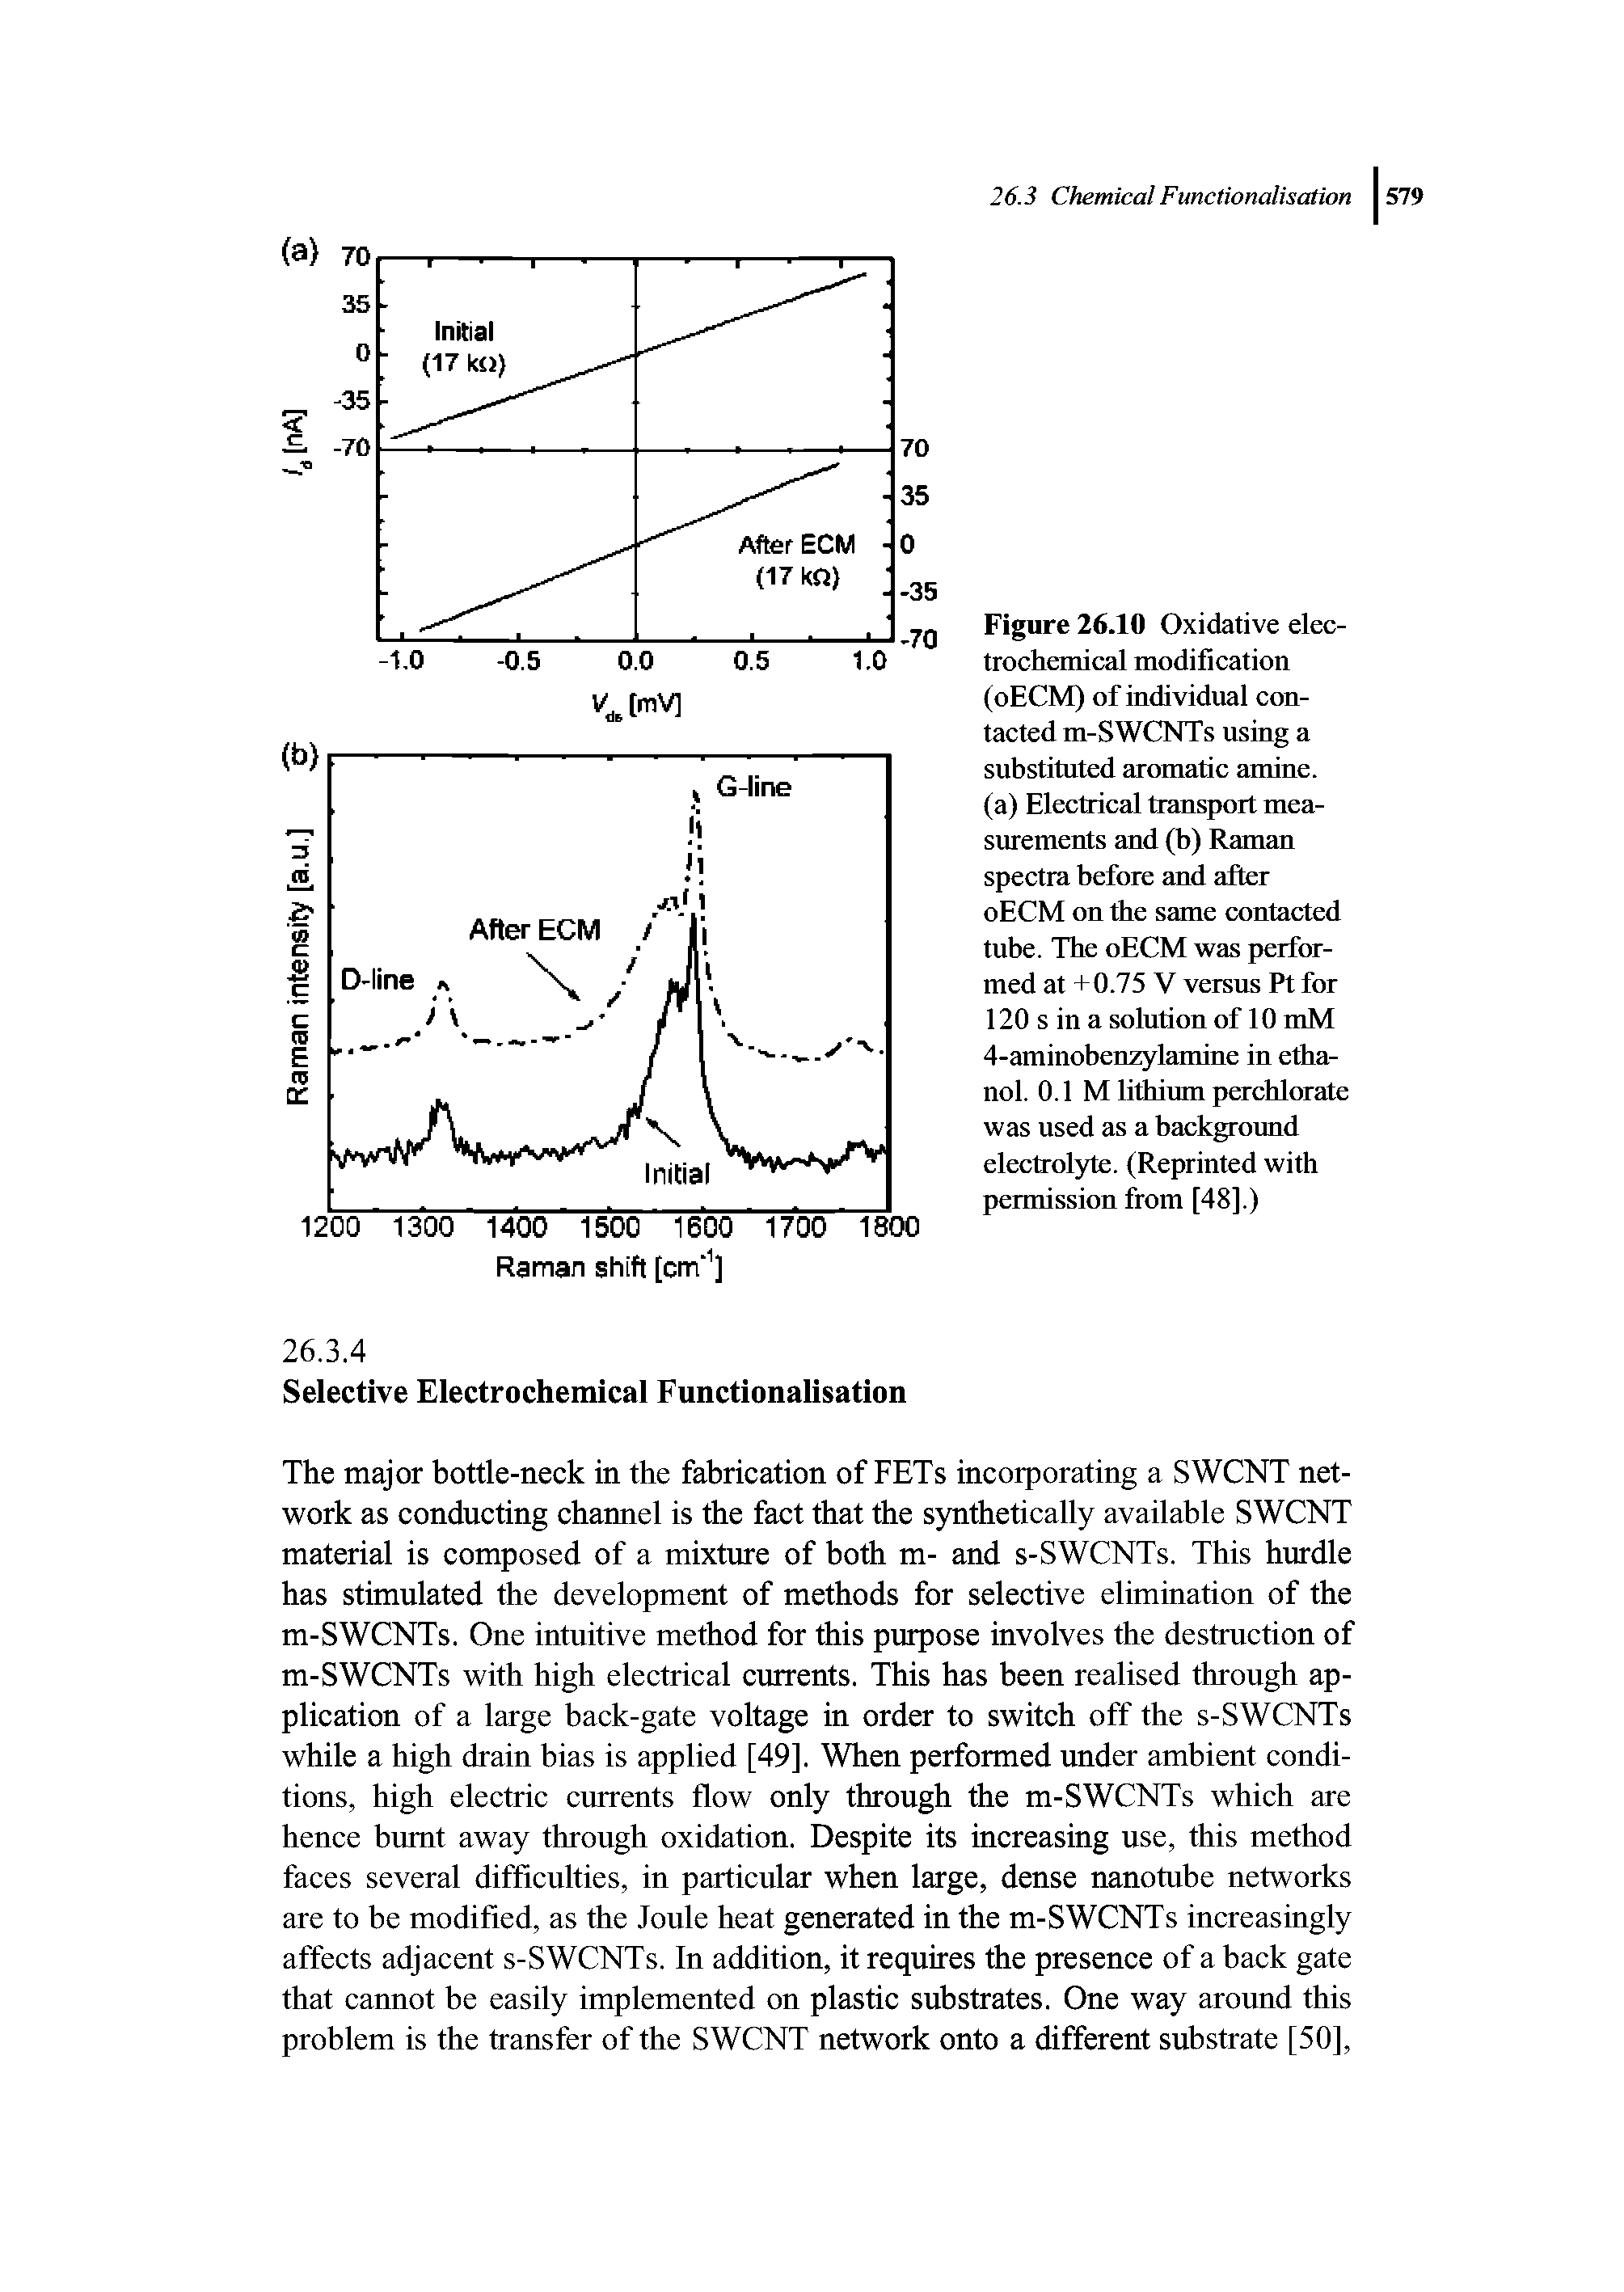 Figure 26.10 Oxidative electrochemical modification (oECM) of individual contacted m-SWCNTs using a substituted aromatic amine, (a) Electrical transport measurements and (b) Raman spectra before and after oECM on the same contacted tube. The oECM was performed at +0.75 V versus Pt for 120 s in a solution of 10 mM 4-aminobenzylamine in ethanol. 0.1 M lithium perchlorate was used as a background electrol54e. (Reprinted with permission from [48].)...